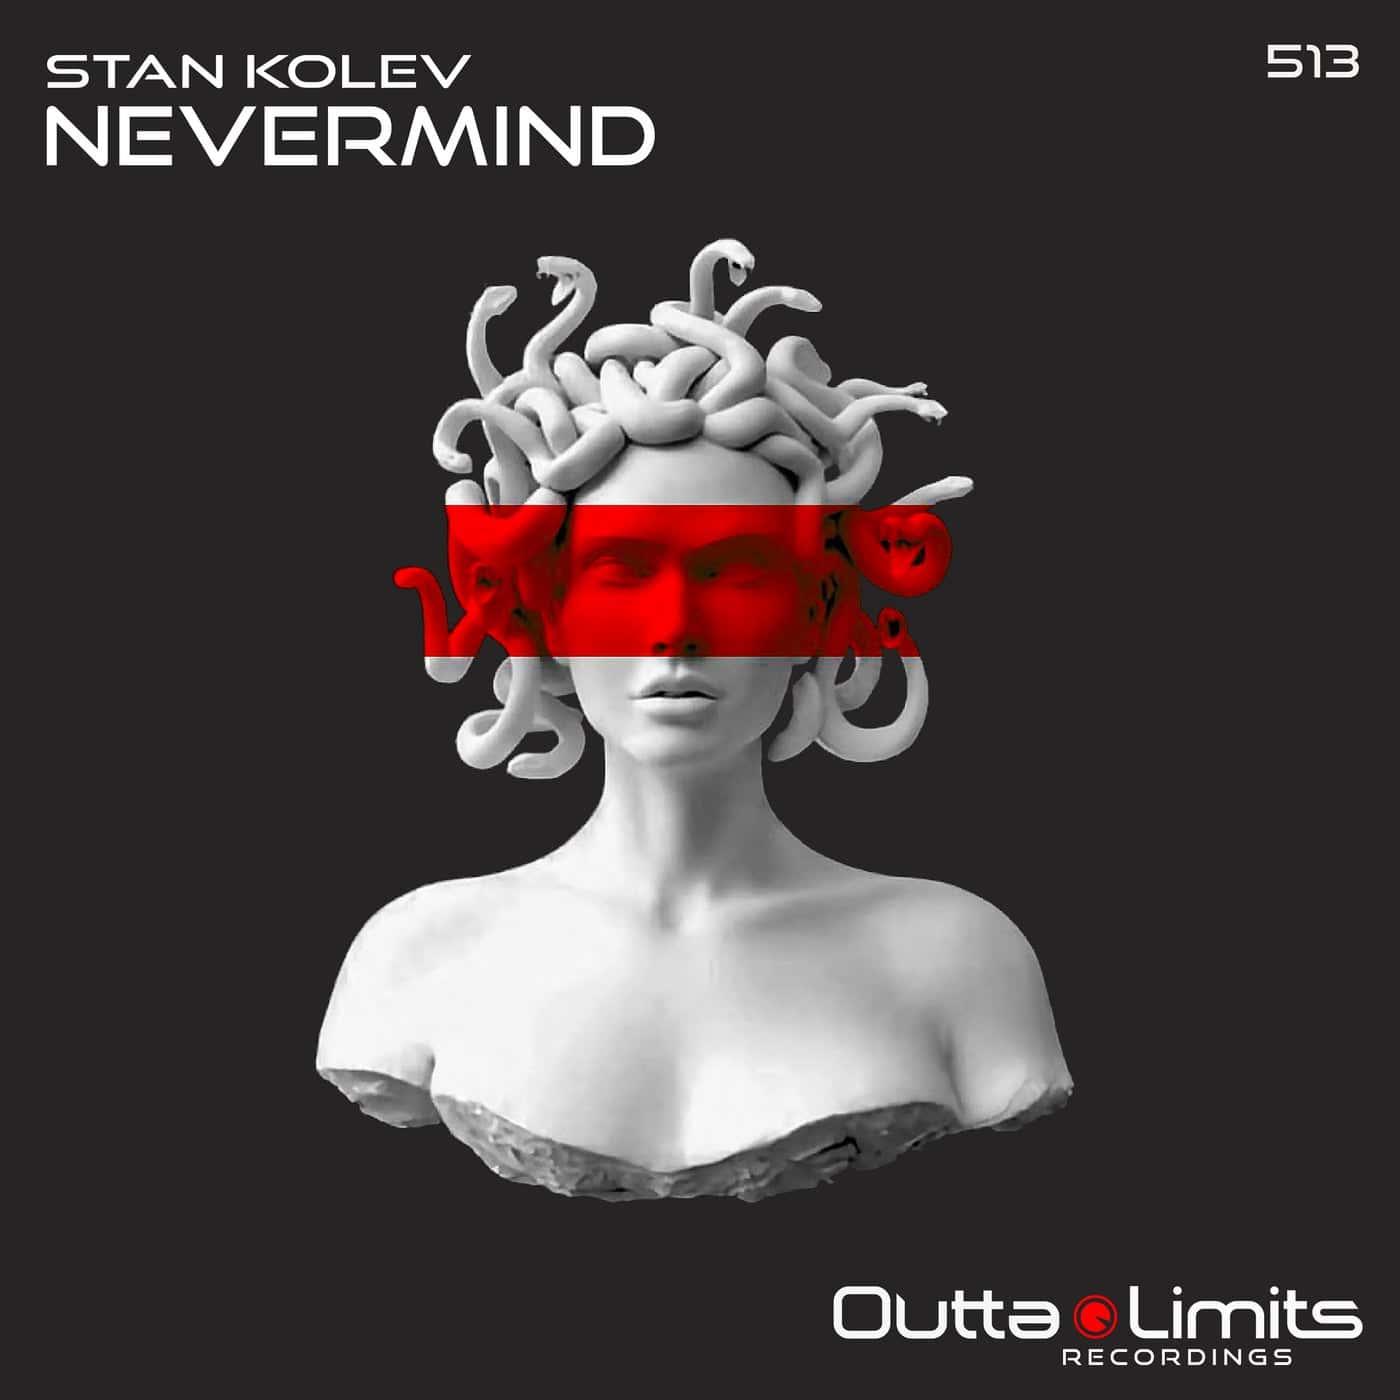 image cover: Nevermind by Stan Kolev on Outta Limits